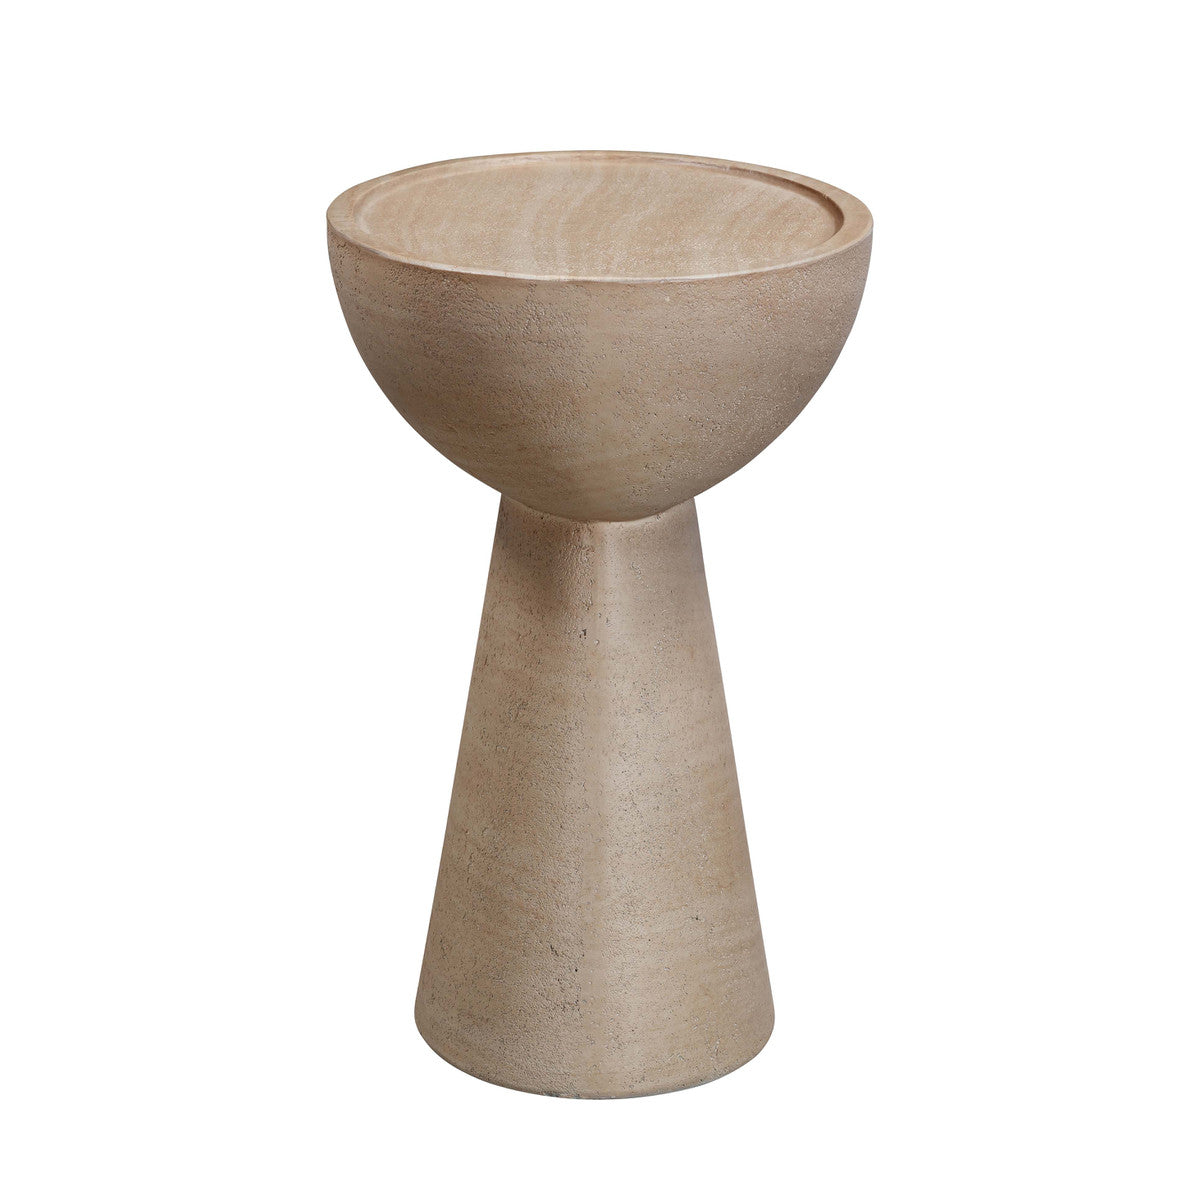 Cline Textured Faux Travertine Indoor / Outdoor Side Table